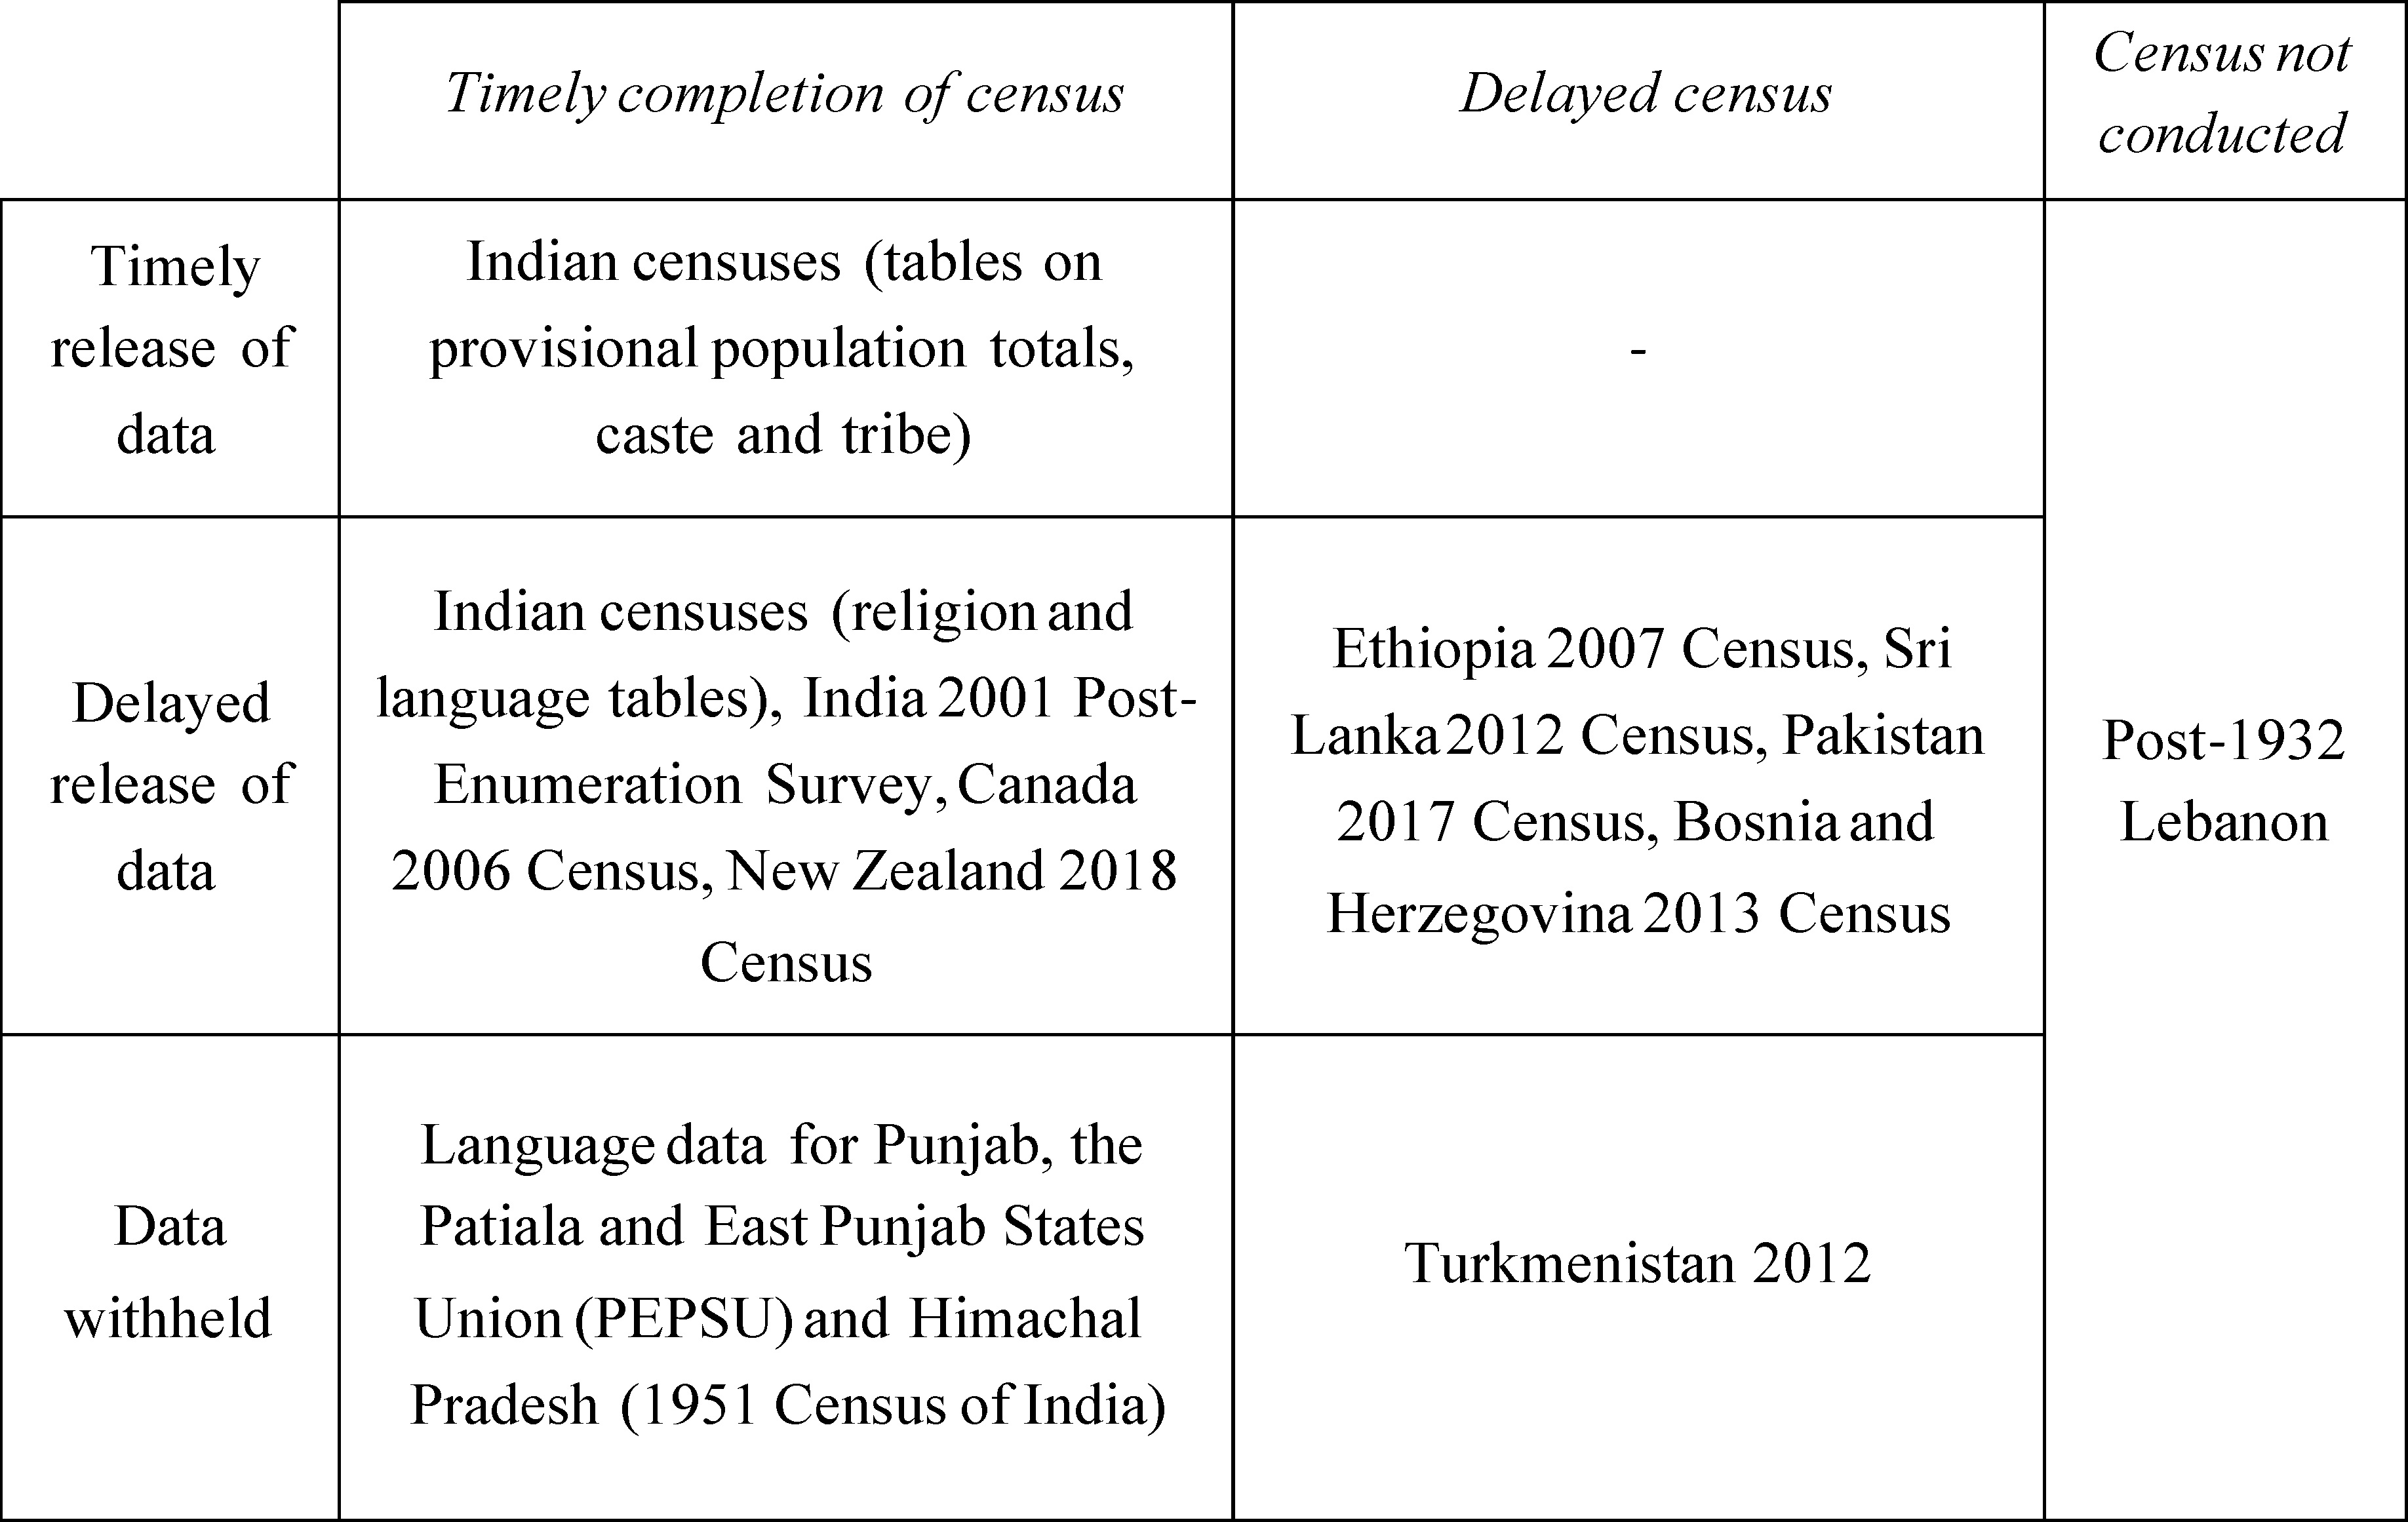 Understanding delays. Note: Delays in conducting census are shown along the horizontal axis, while the delays in releasing data are shown on the vertical axis. Sources: Bosnia and Herzegovina [73], Canada [25], Ethiopia [24], India (see Table 1), PEPSU and Himachal Pradesh [37], New Zealand [77, 78], Pakistan [90], Sri Lanka [61, 8], Turkmenistan [38]. 